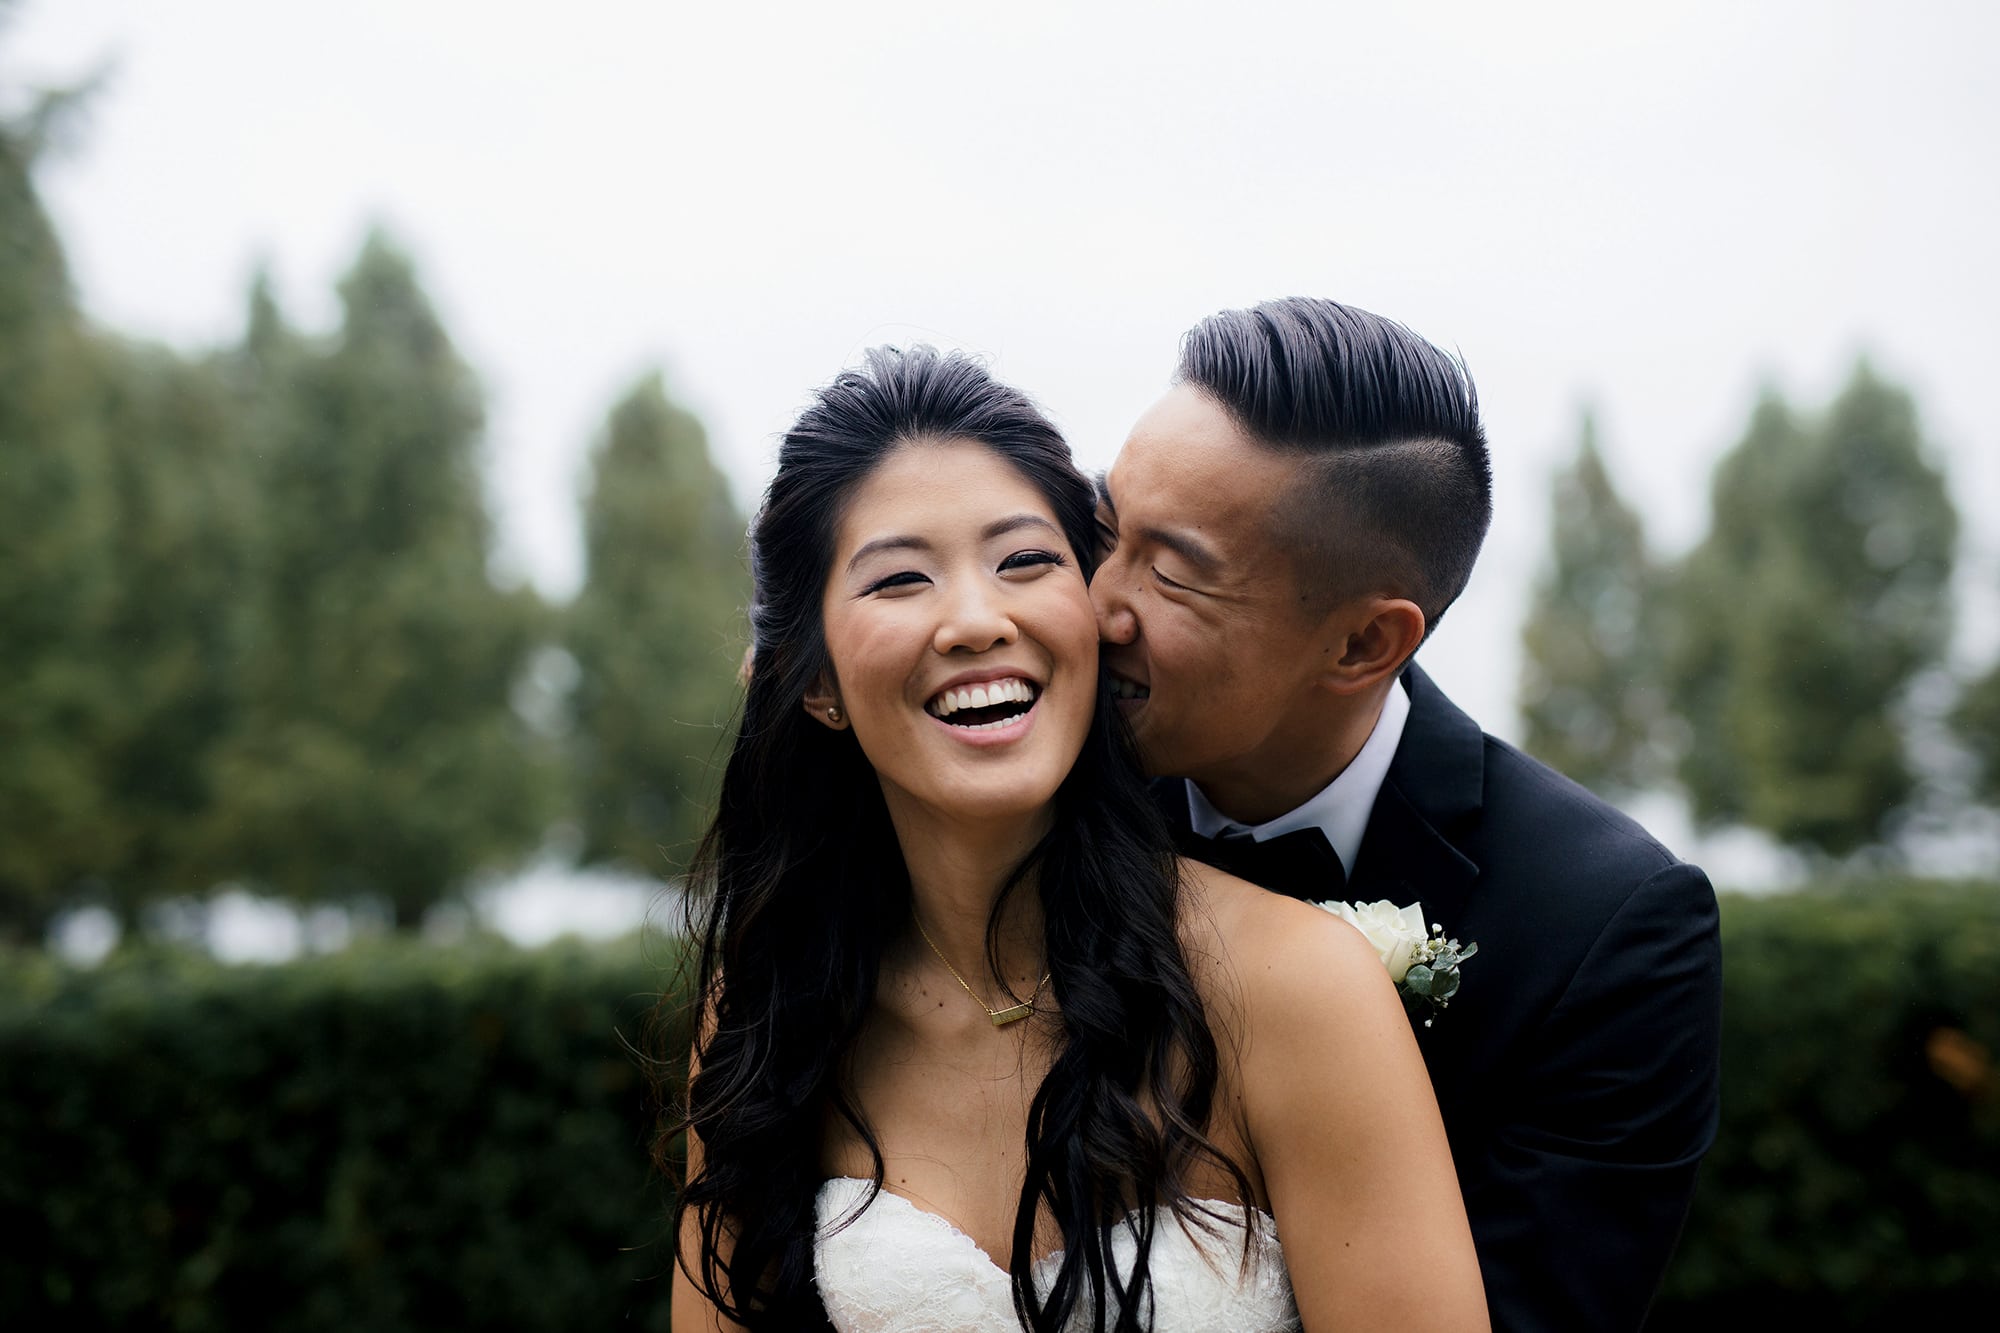 a groom kisses a bride's cheek; they smile